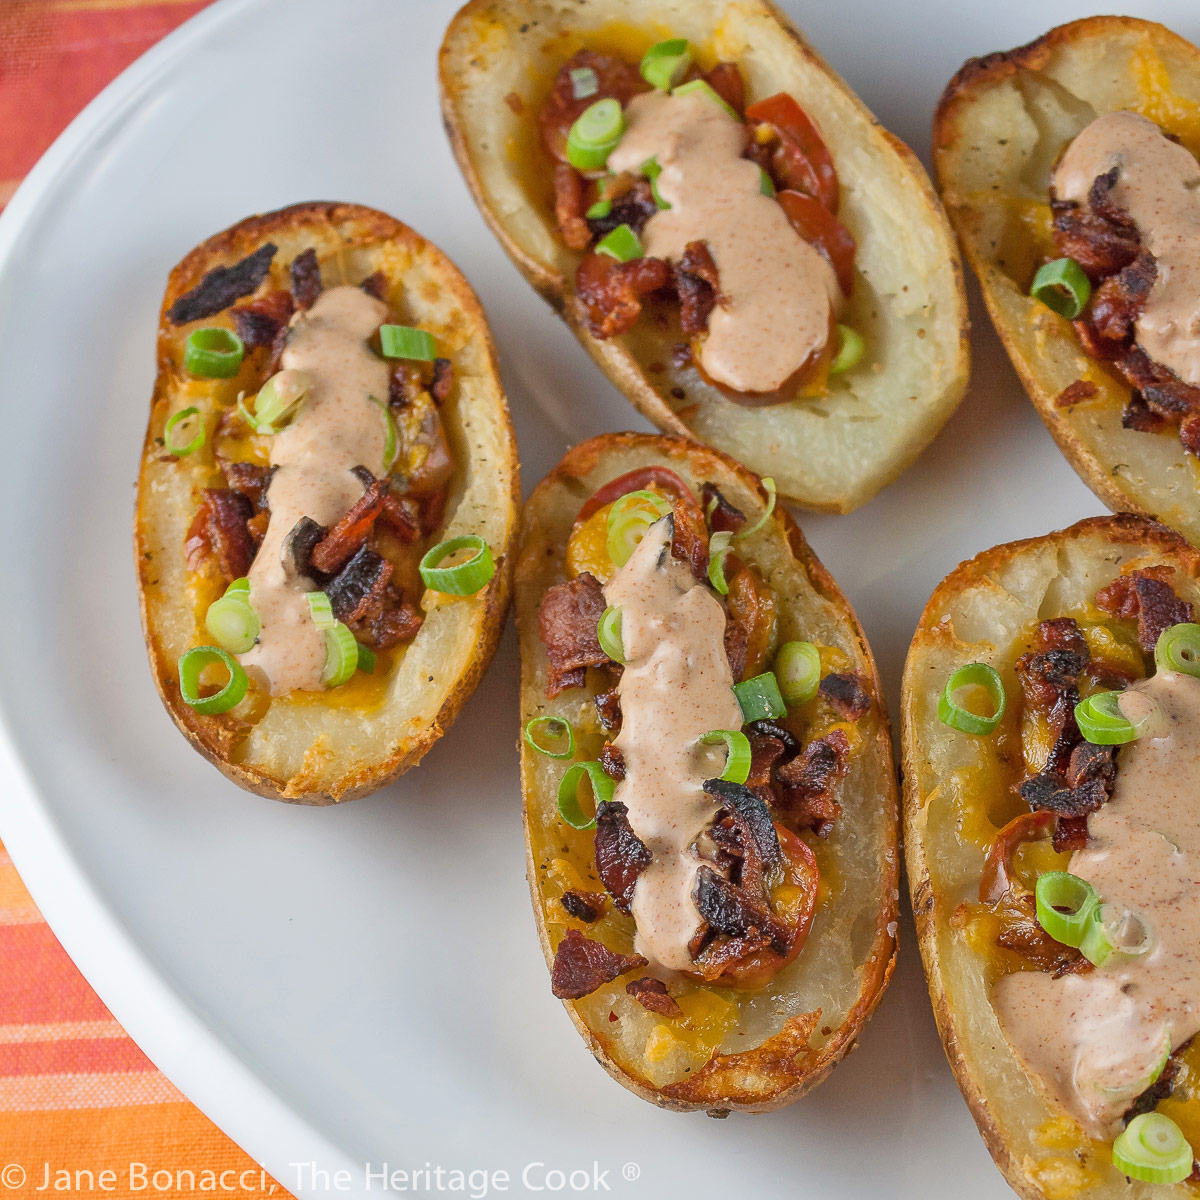 Baked potatoes are split lengthwise with the centers hollowed out and filled with crumbled bacon, green chiles, tomatoes, and melted cheese. Topped with green onions and a drizzle of taco cream. Served with lime wedges. © 2023 Jane Bonacci, The Heritage Cook.